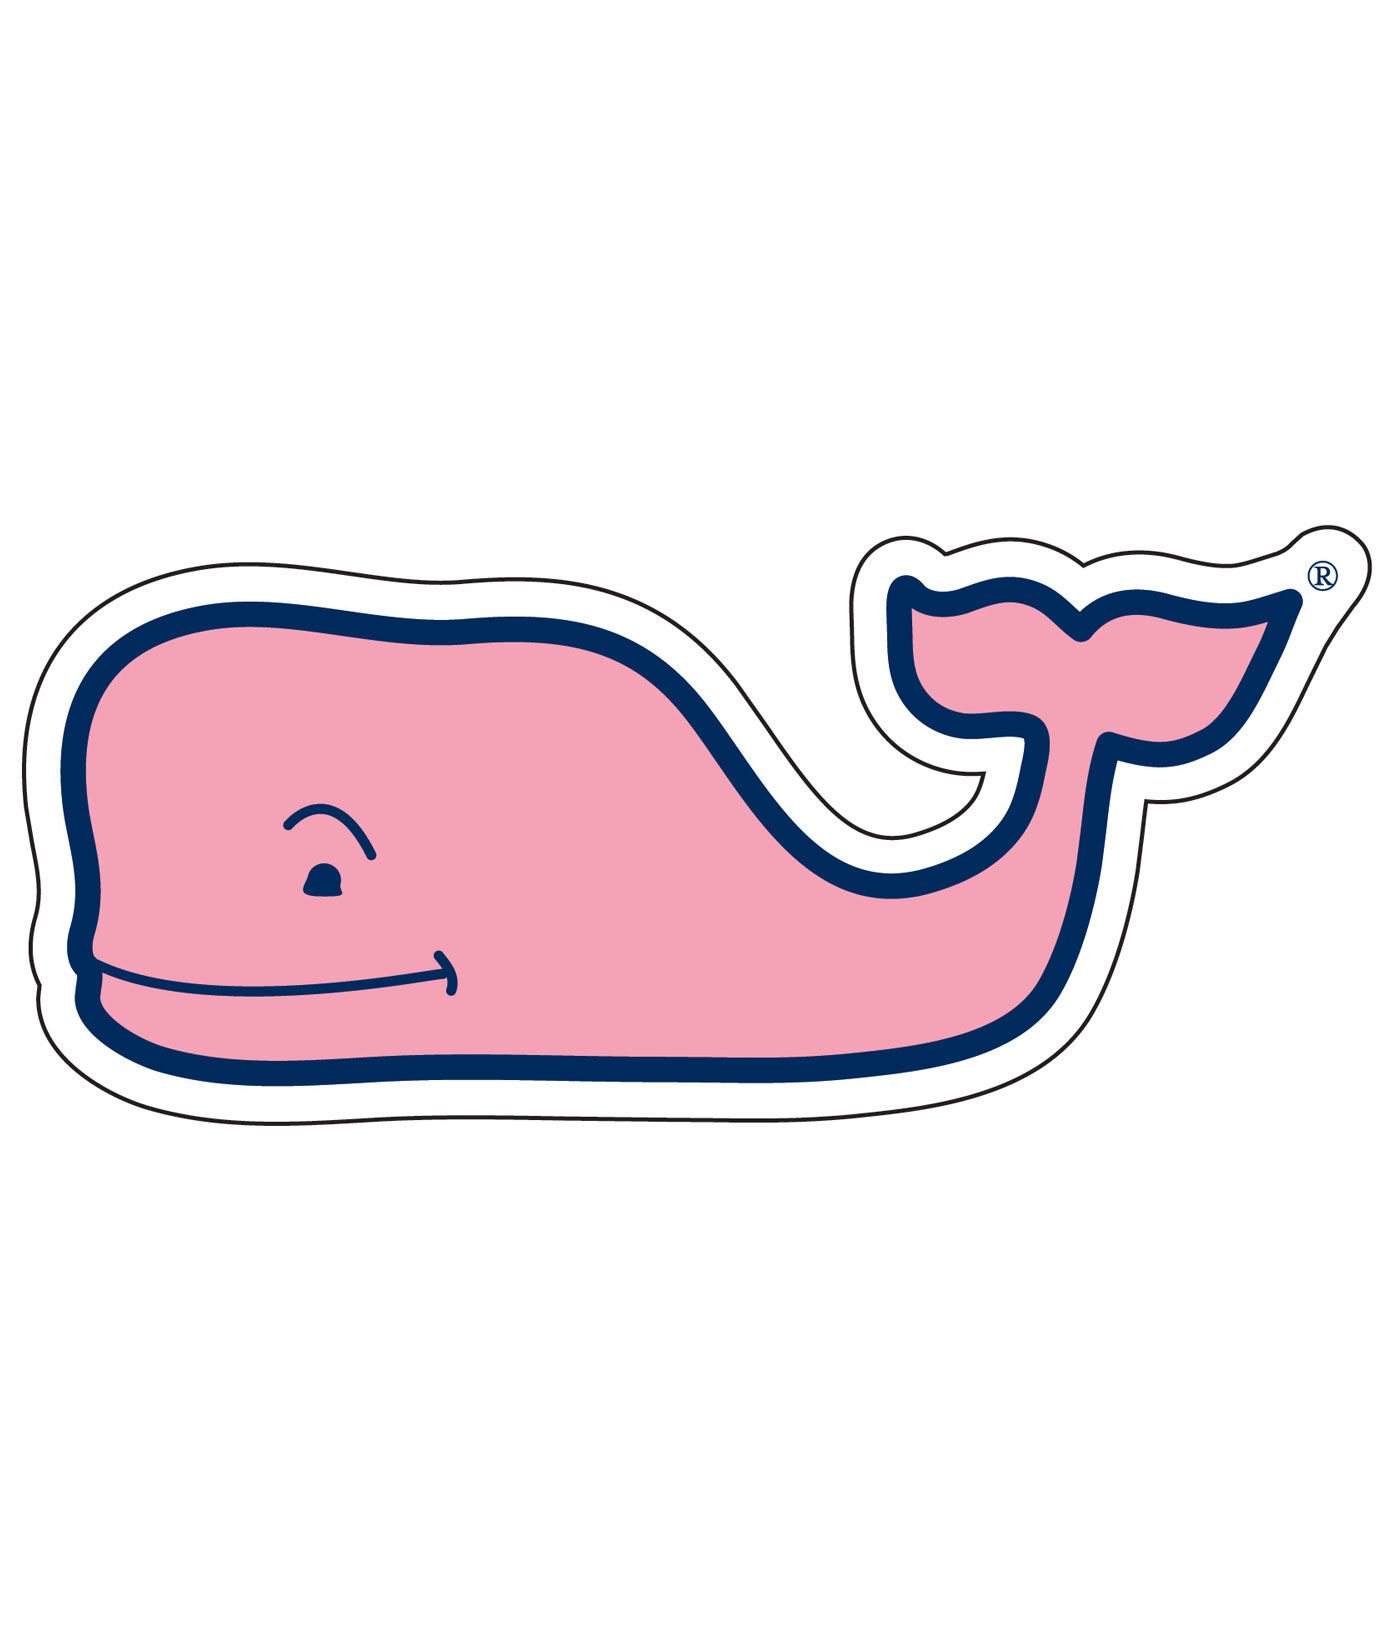 VINEYARD VINE WHALE RED STICKER DECAL SOUTHERN PROPER